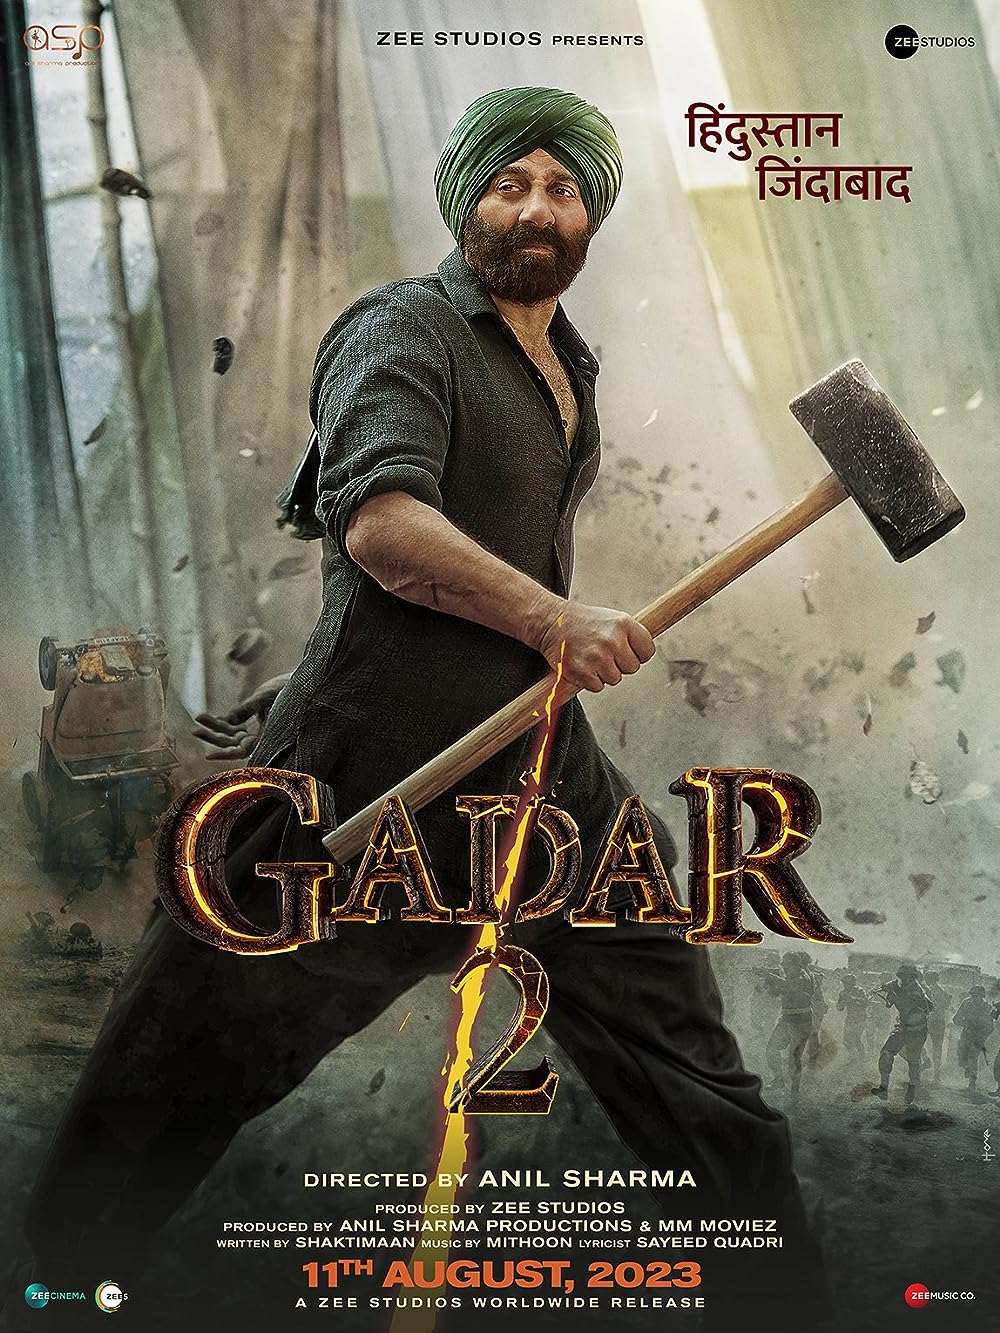 Gadar 2 (October 6) - Streaming on Zee5October 6 is officially the release date for Gadar 2's digital premiere. The actioner stars Sunny Deol in the lead and collected over Rs 500 crore at the box office. 